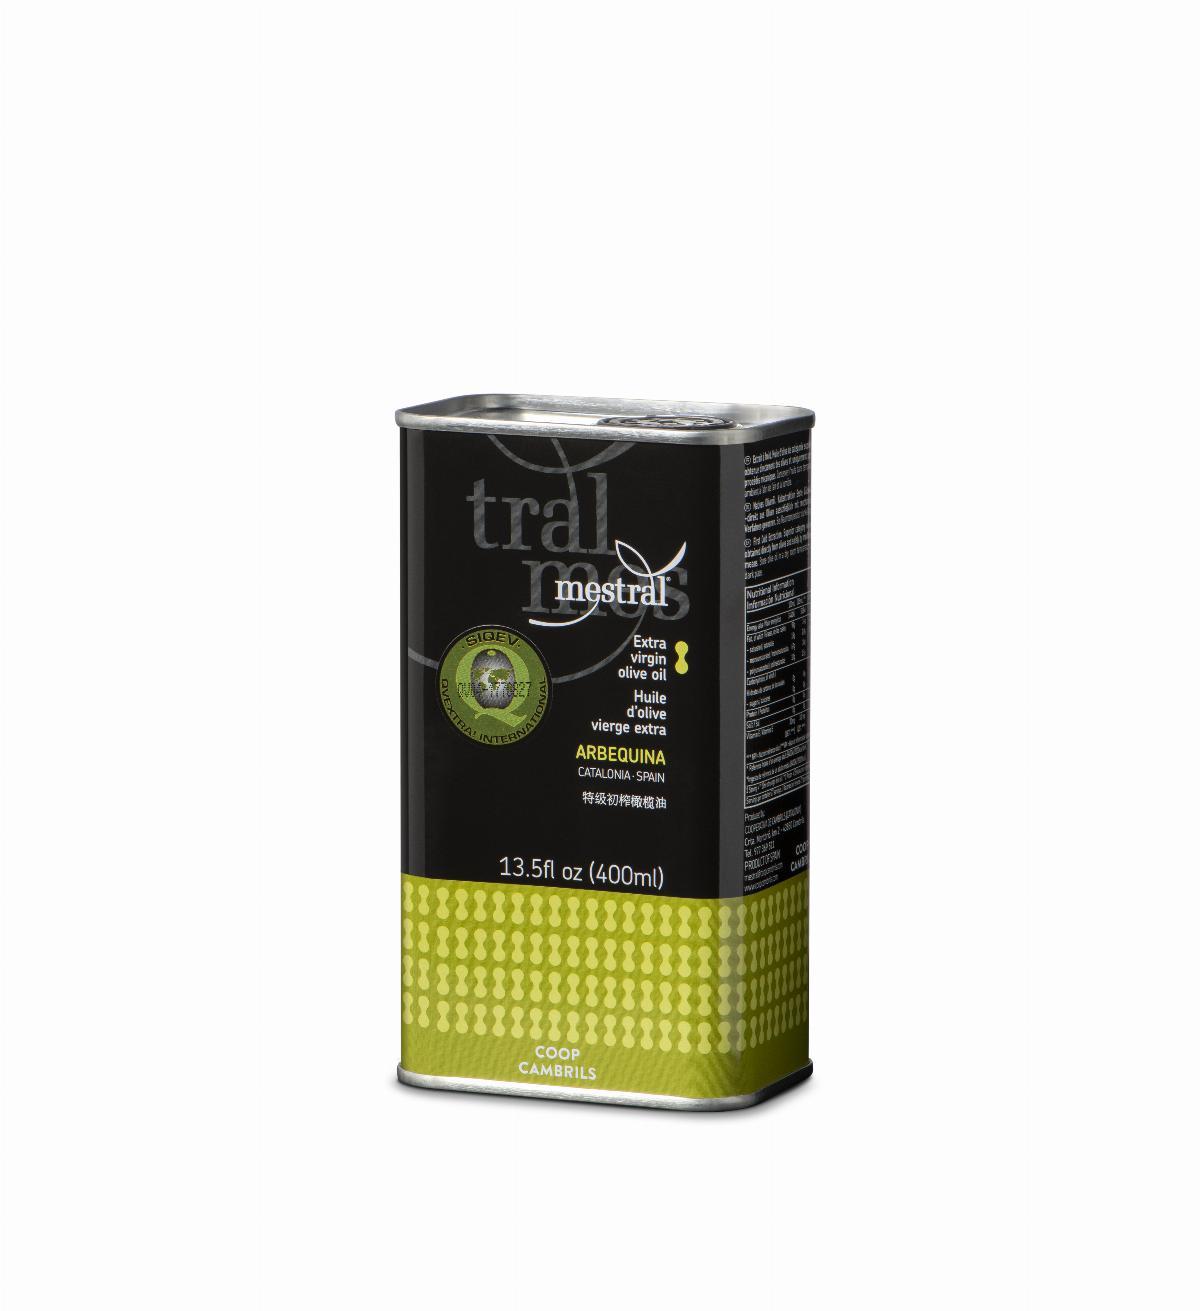 Huile d'olive Vierge Extra Mestral Boite 400mL 100% Arbequina